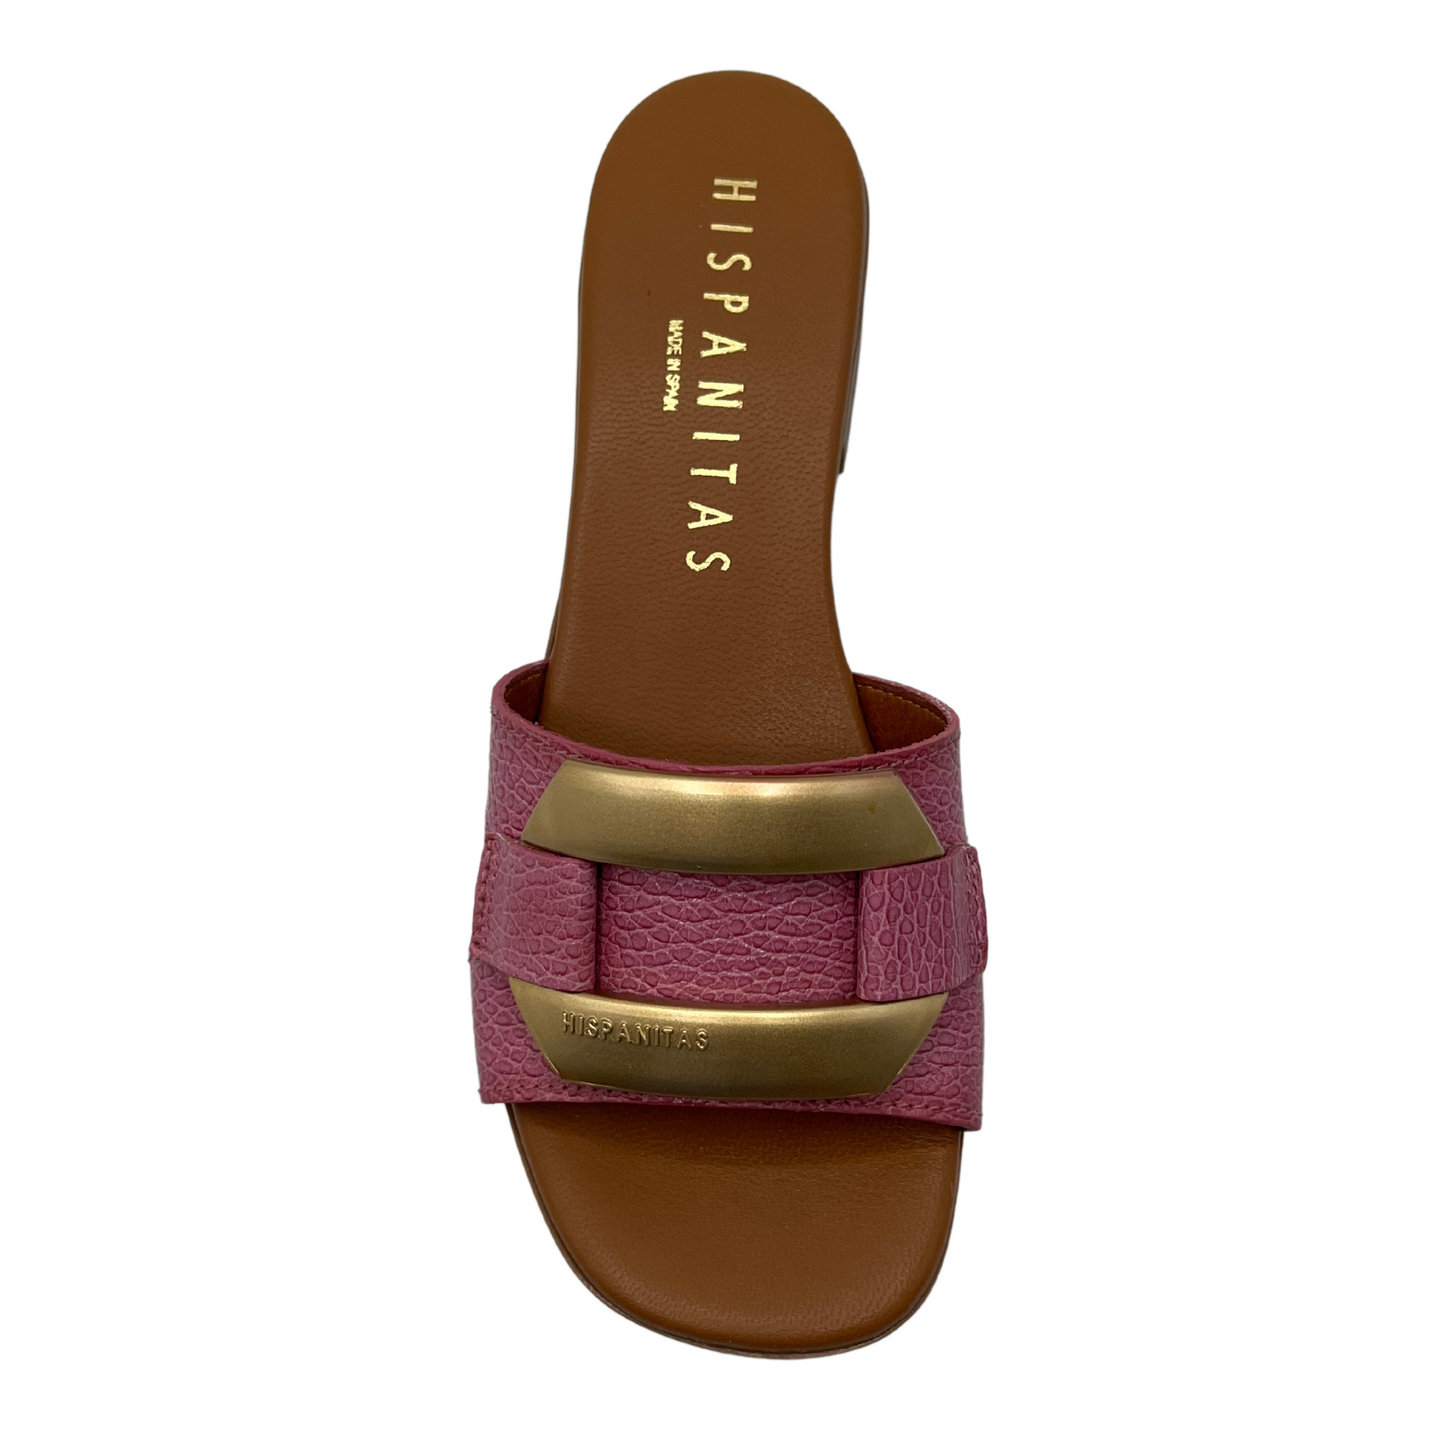 Top view of pink and brown leather sandal with gold brooch detail on upper